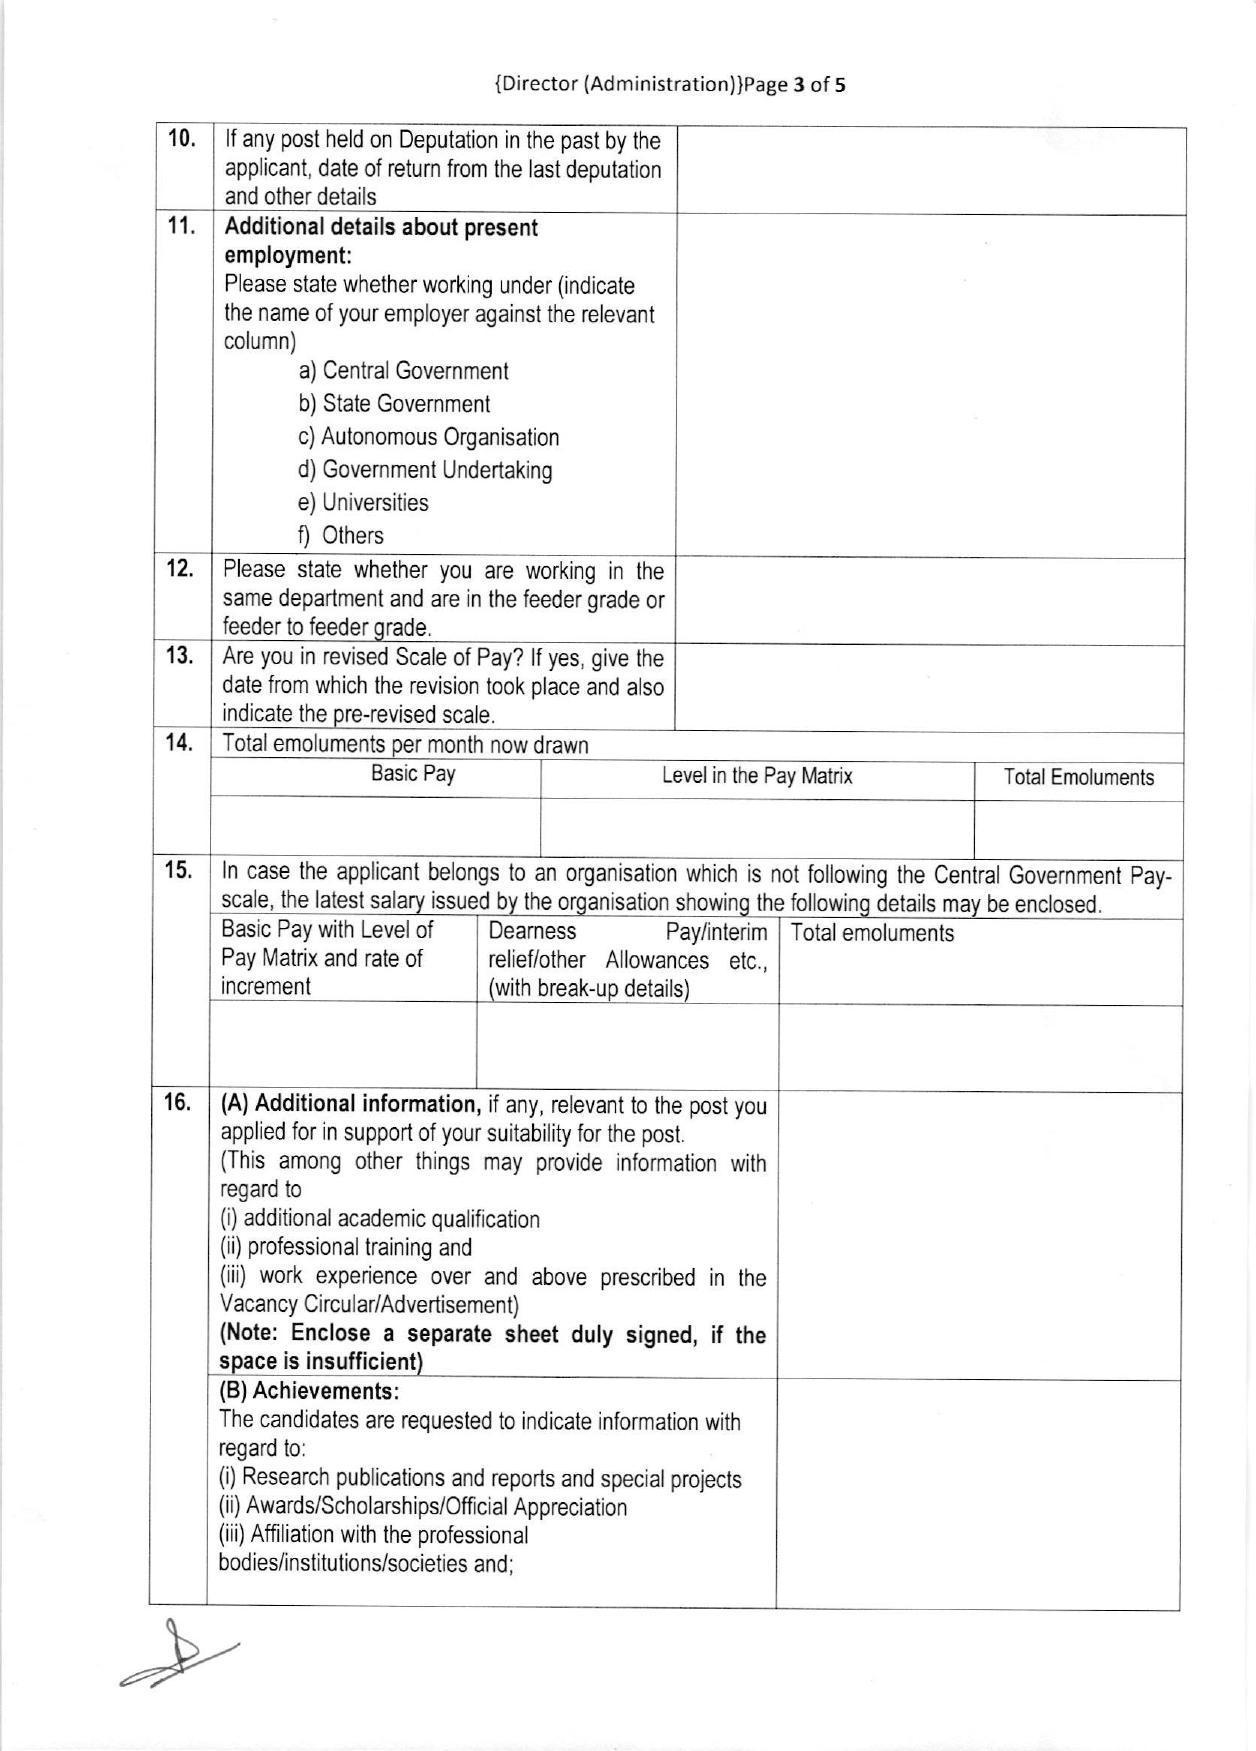 National Technical Research Organisation (NTRO) Invites Application for Director Recruitment 2022 - Page 8